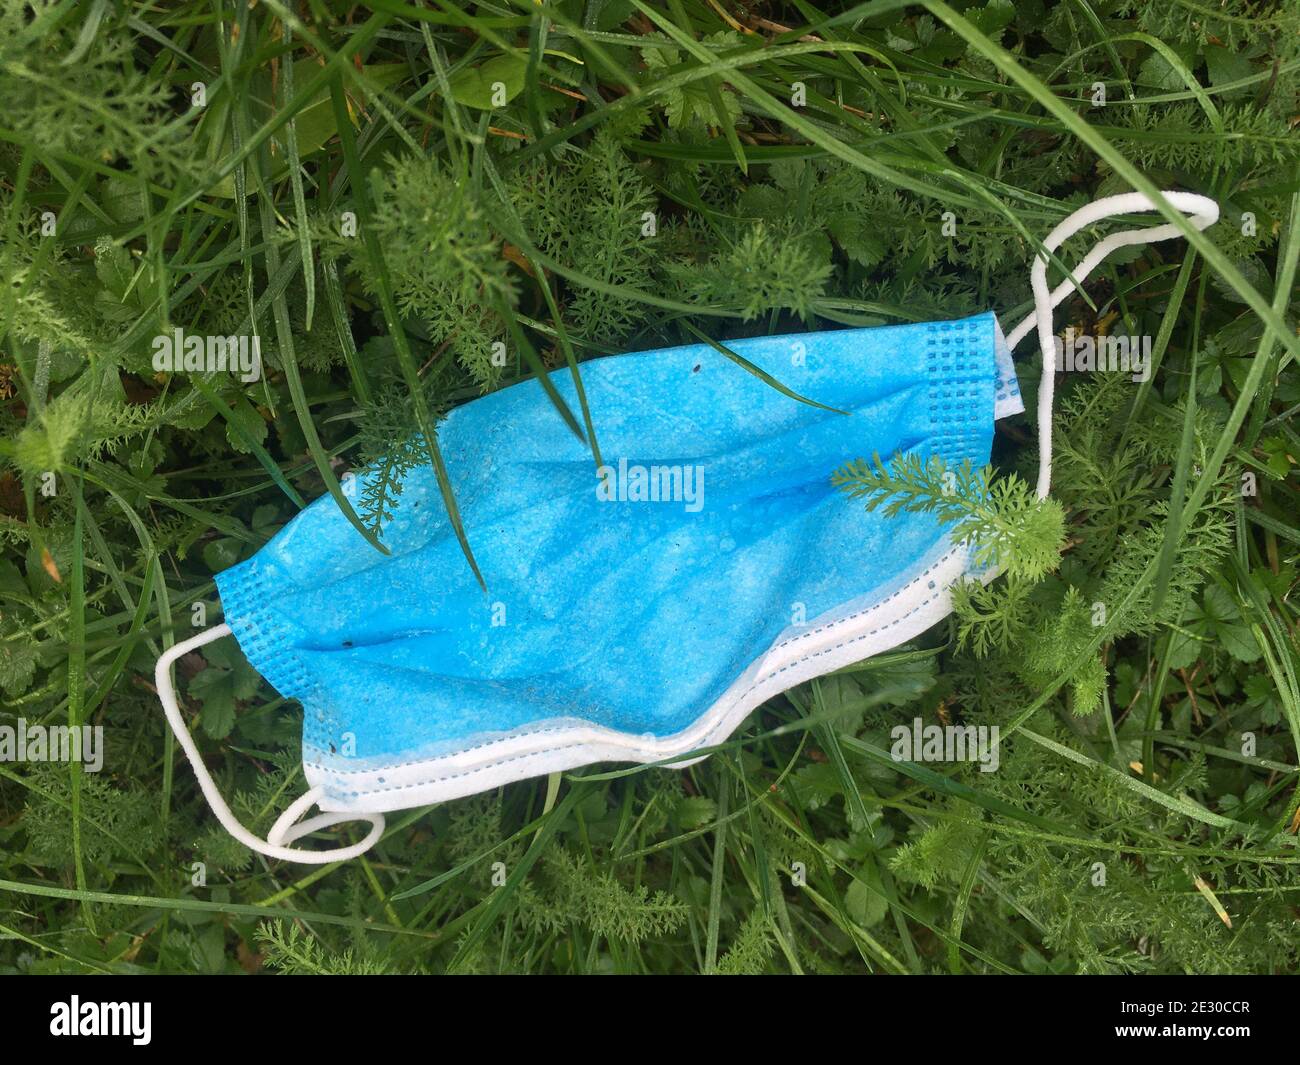 Stockholm, Sweden - September 30, 2020: Many face masks end up in nature or the oceans posing a real problem to the environment Stock Photo